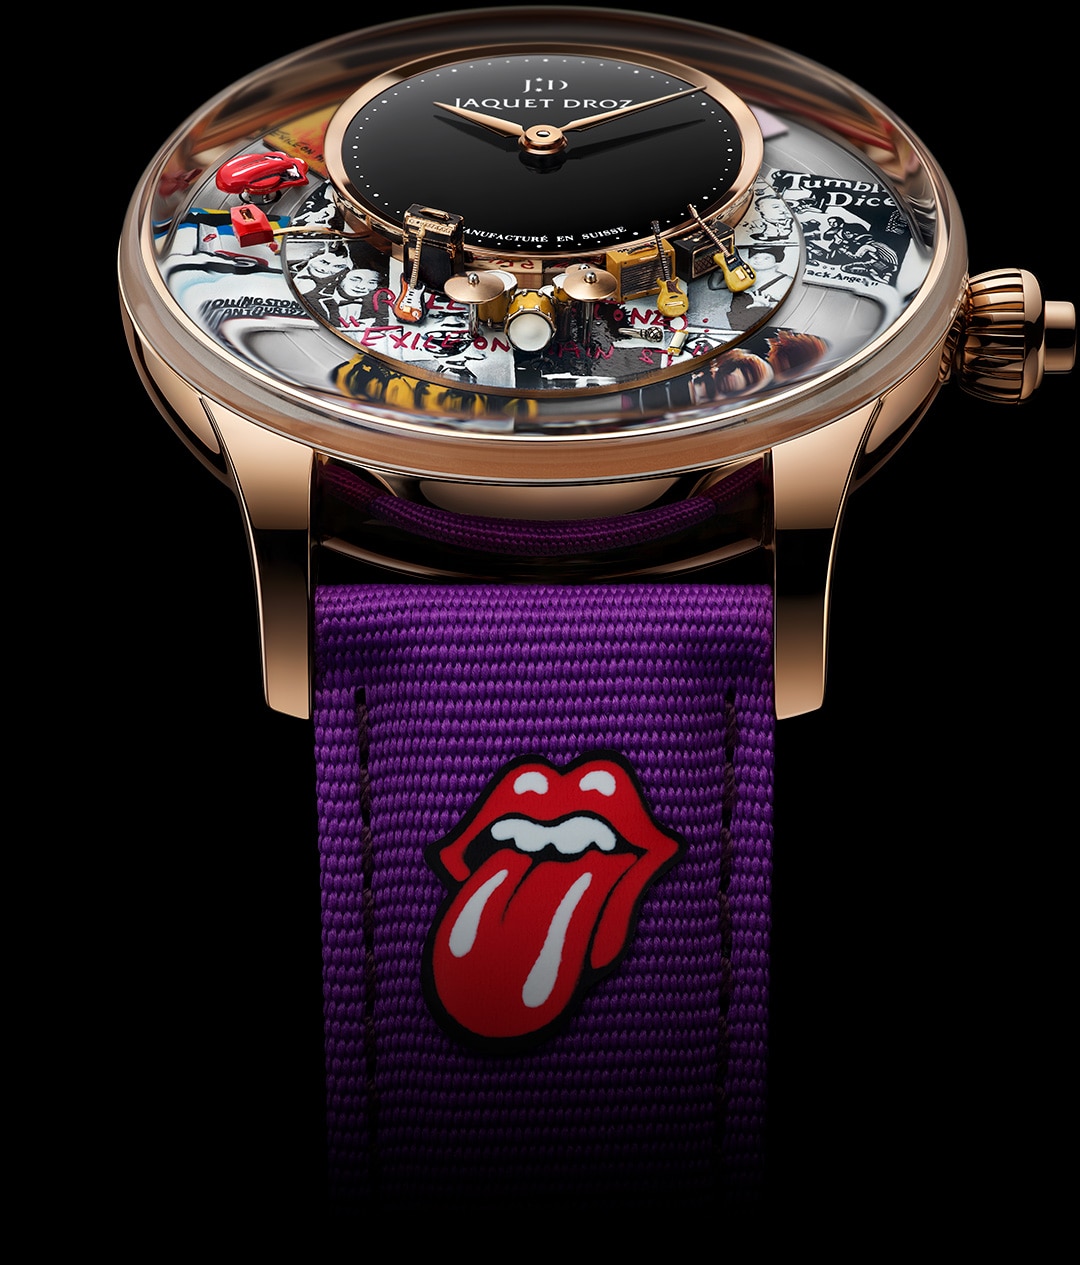 The Rolling Stones Automaton:<br>the Rock ’n’ Rollest unique pieces in watchmaking history